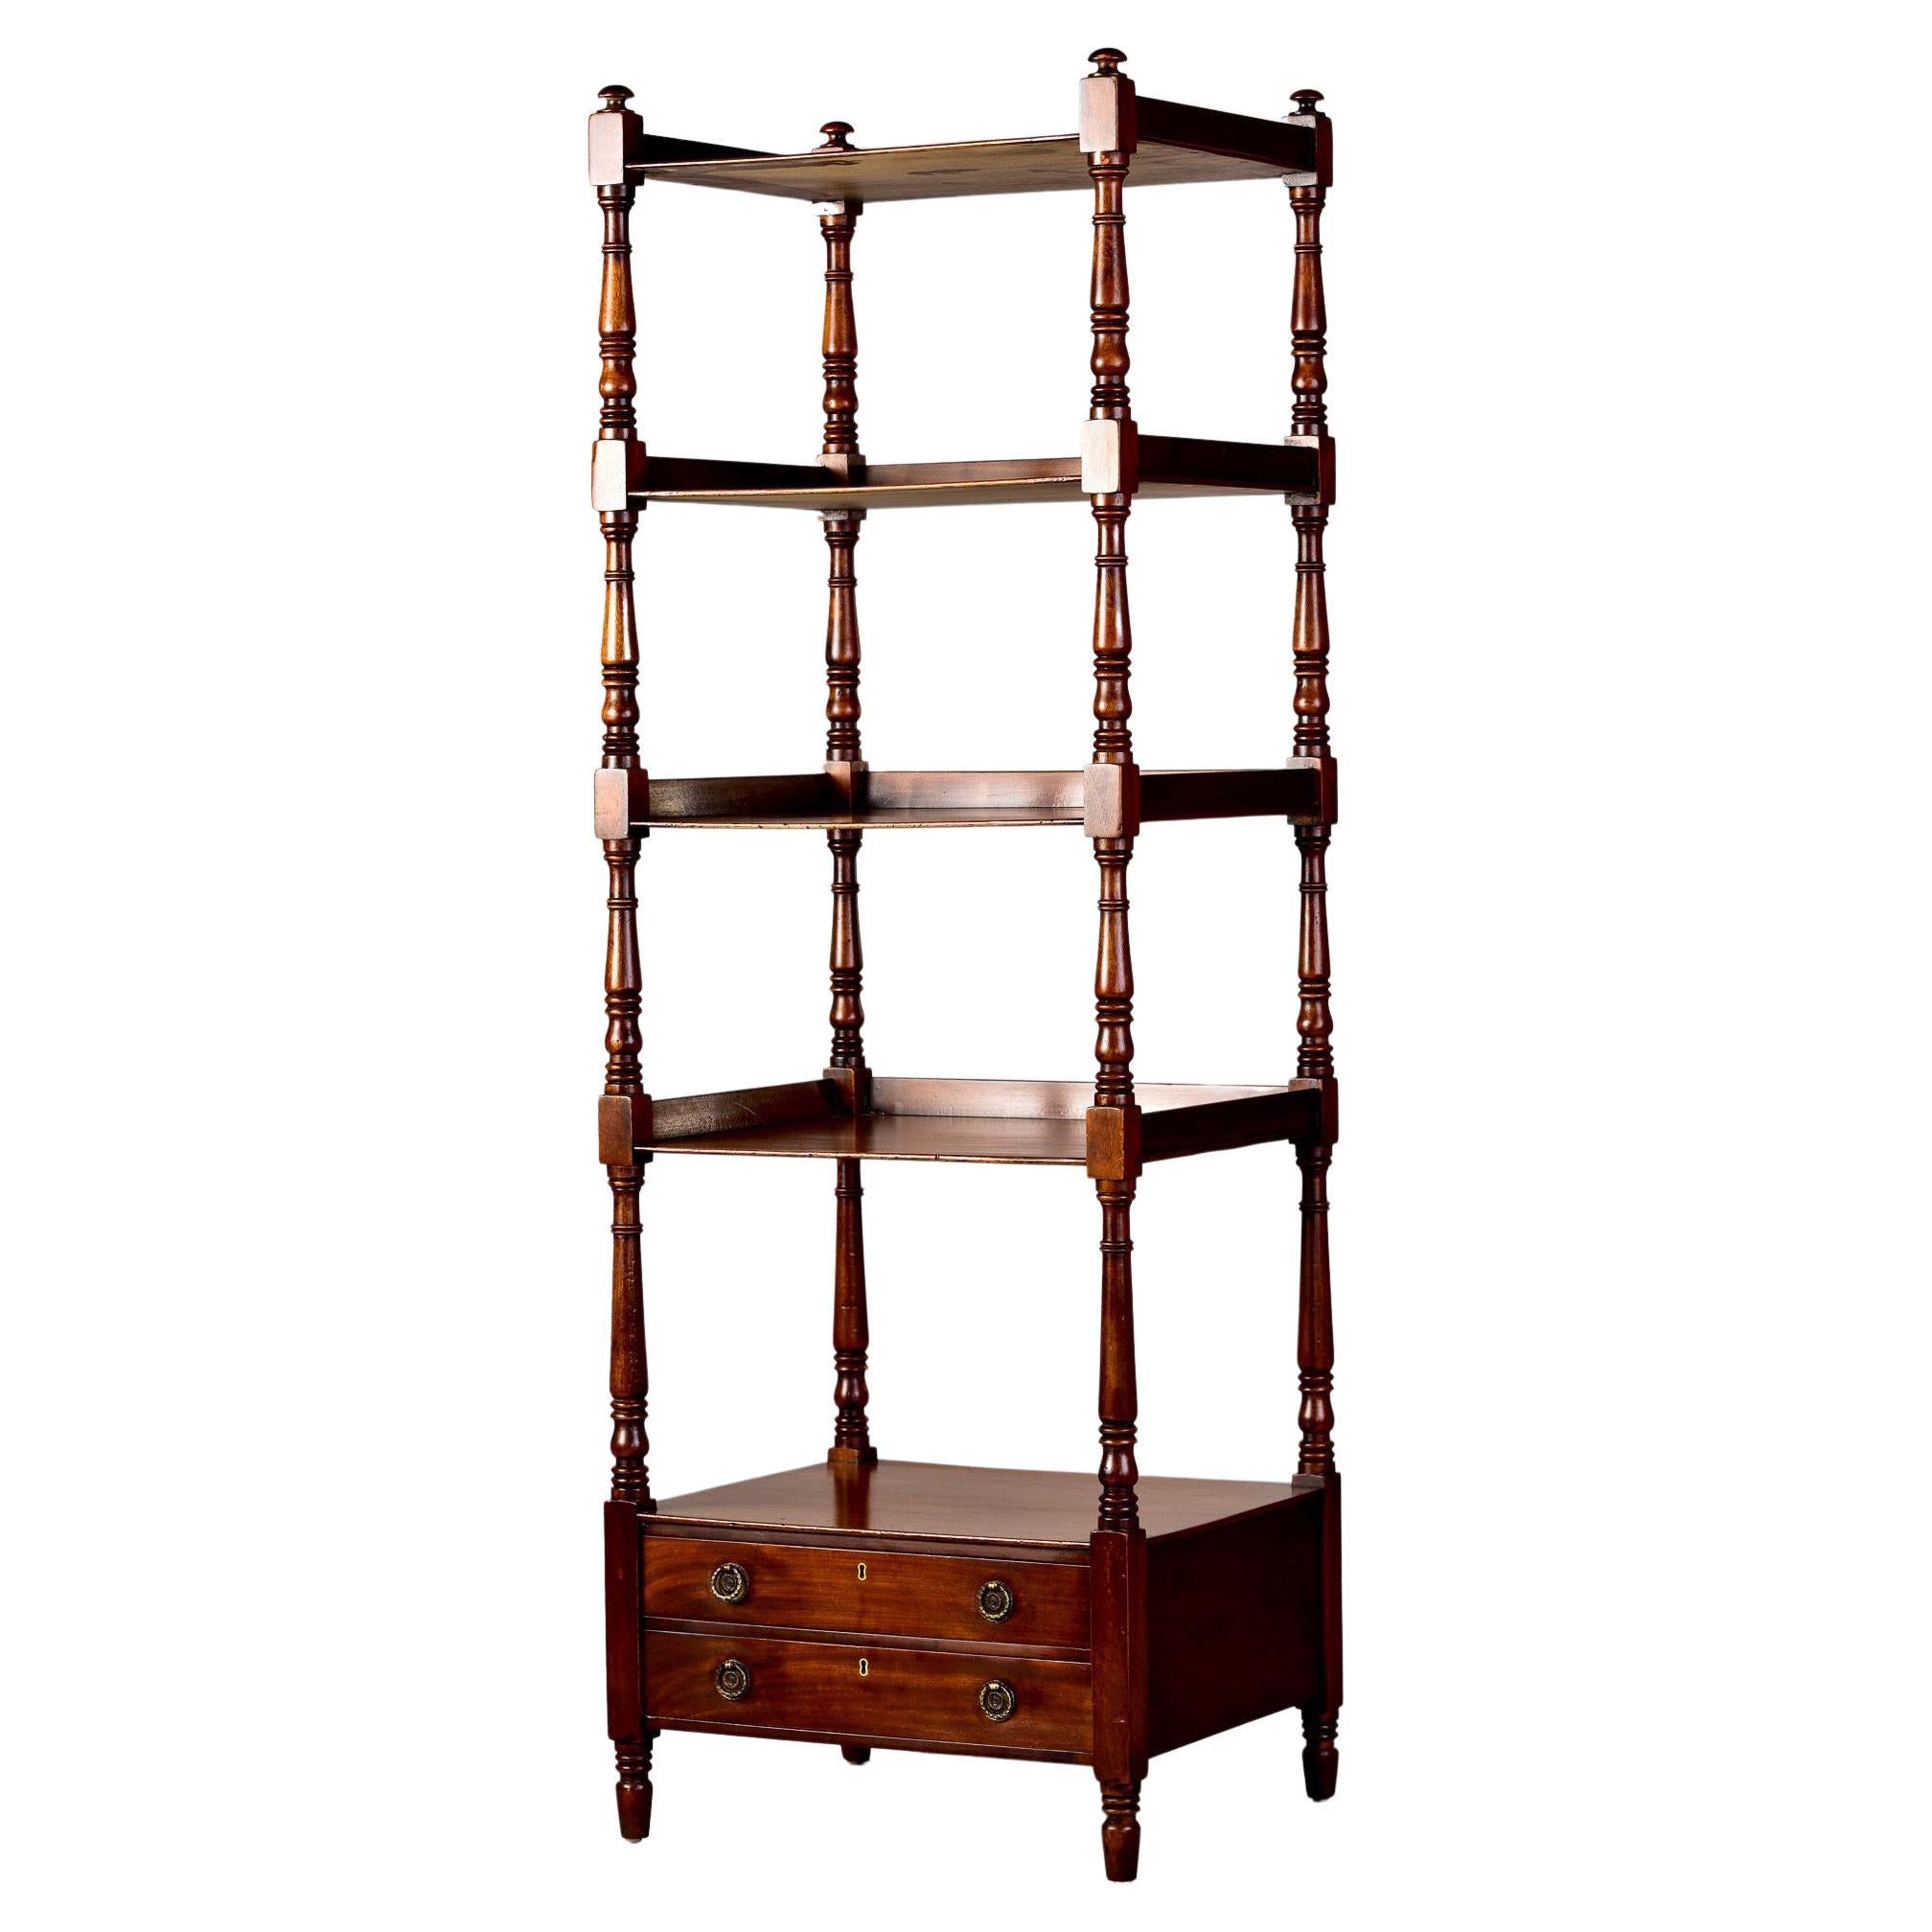 Early 20th C English Mahogany Four Tier Etagere or What Not Shelf